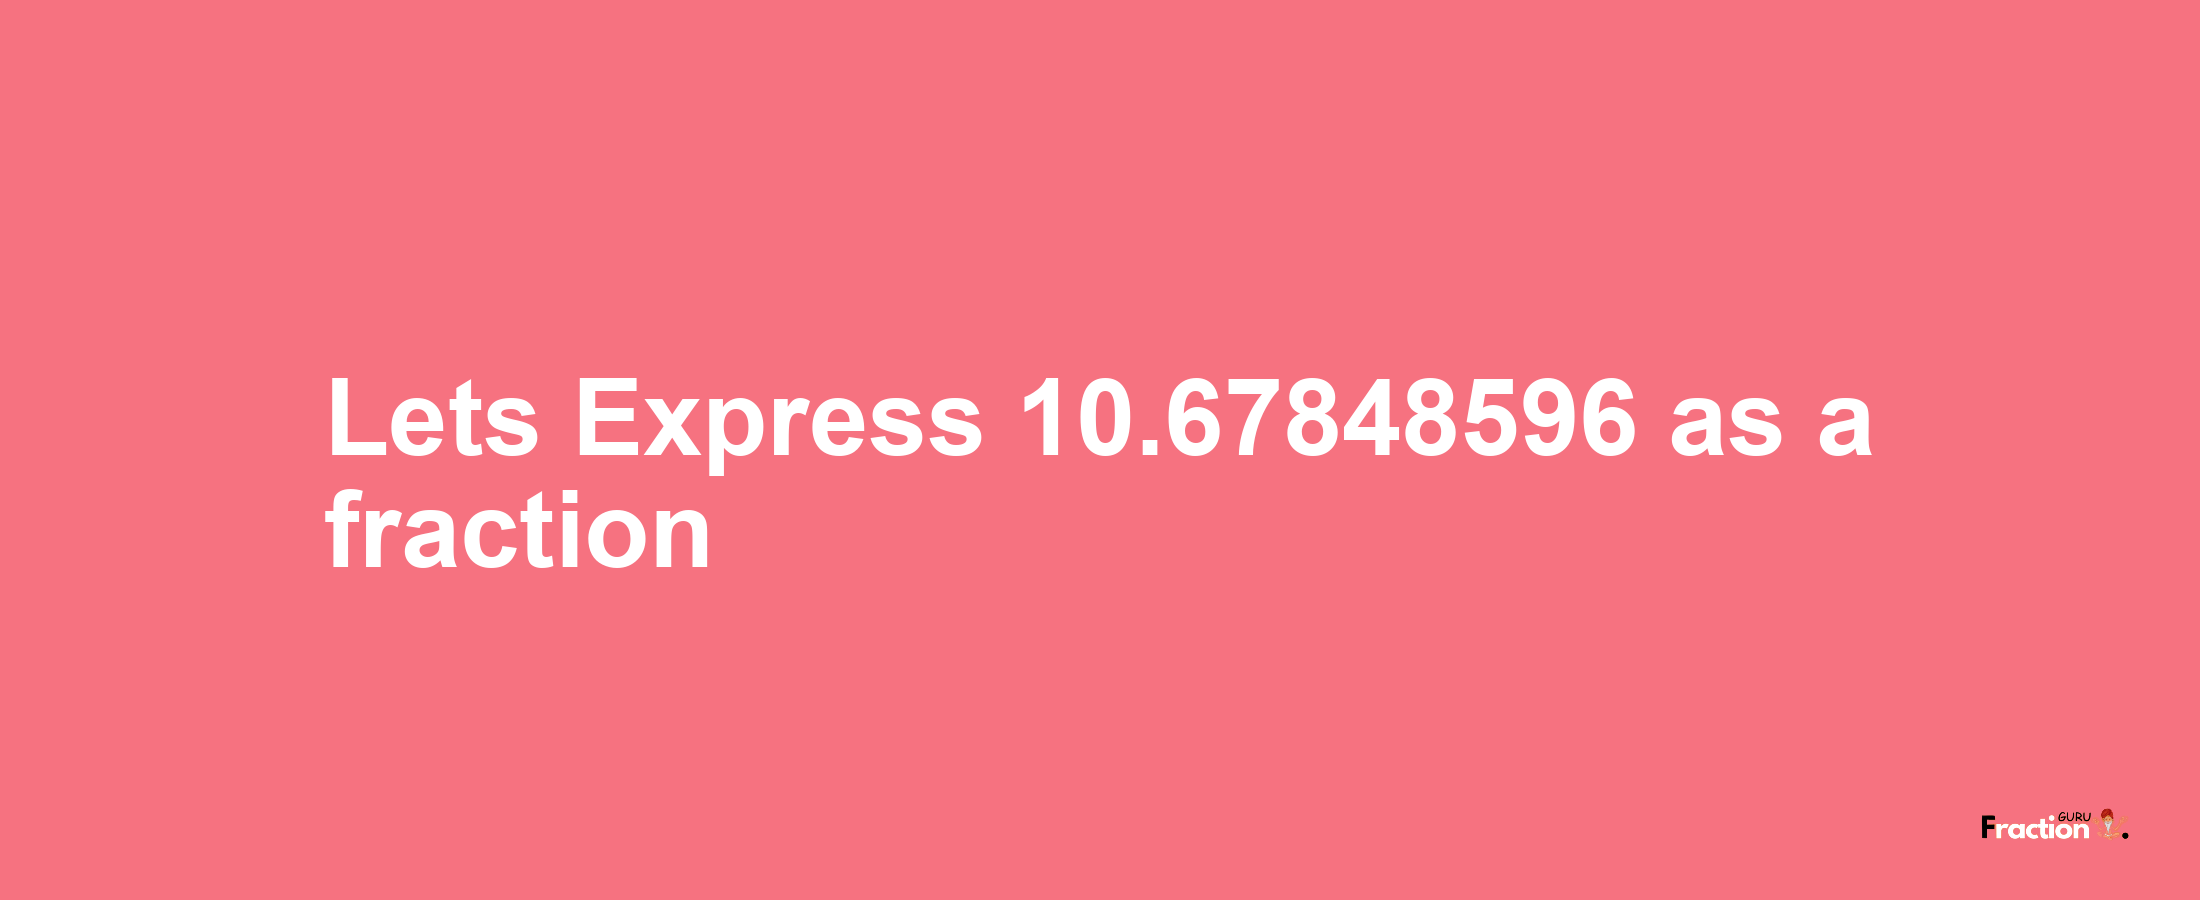 Lets Express 10.67848596 as afraction